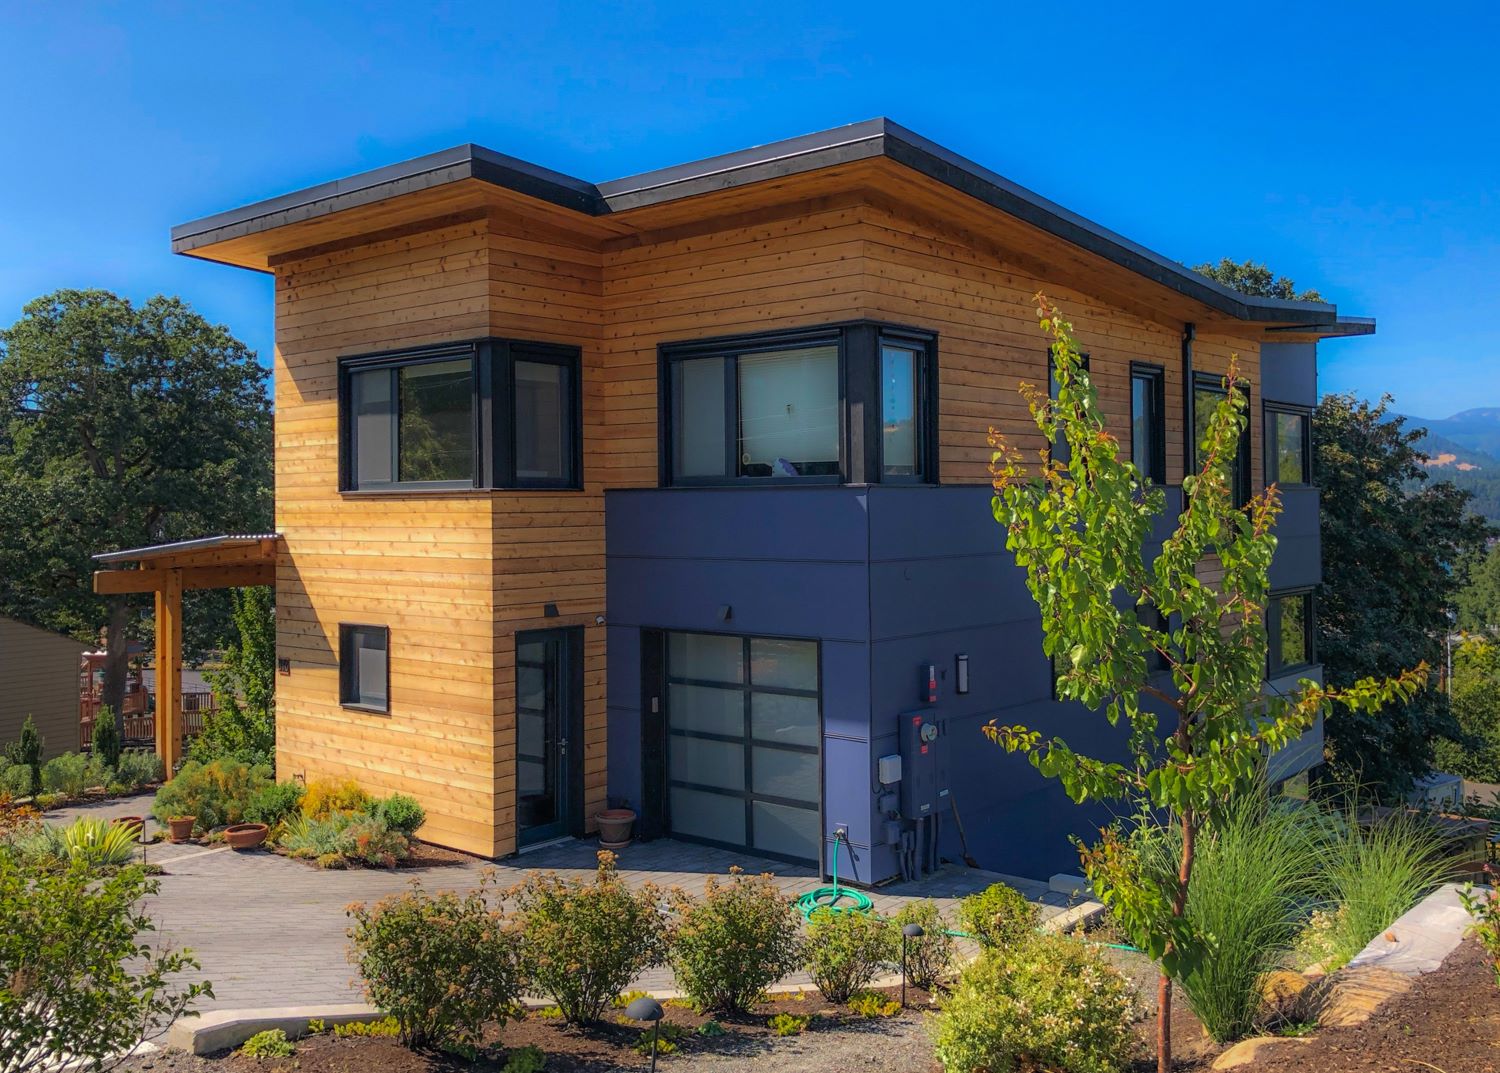 Architectural Firms In Bend Or